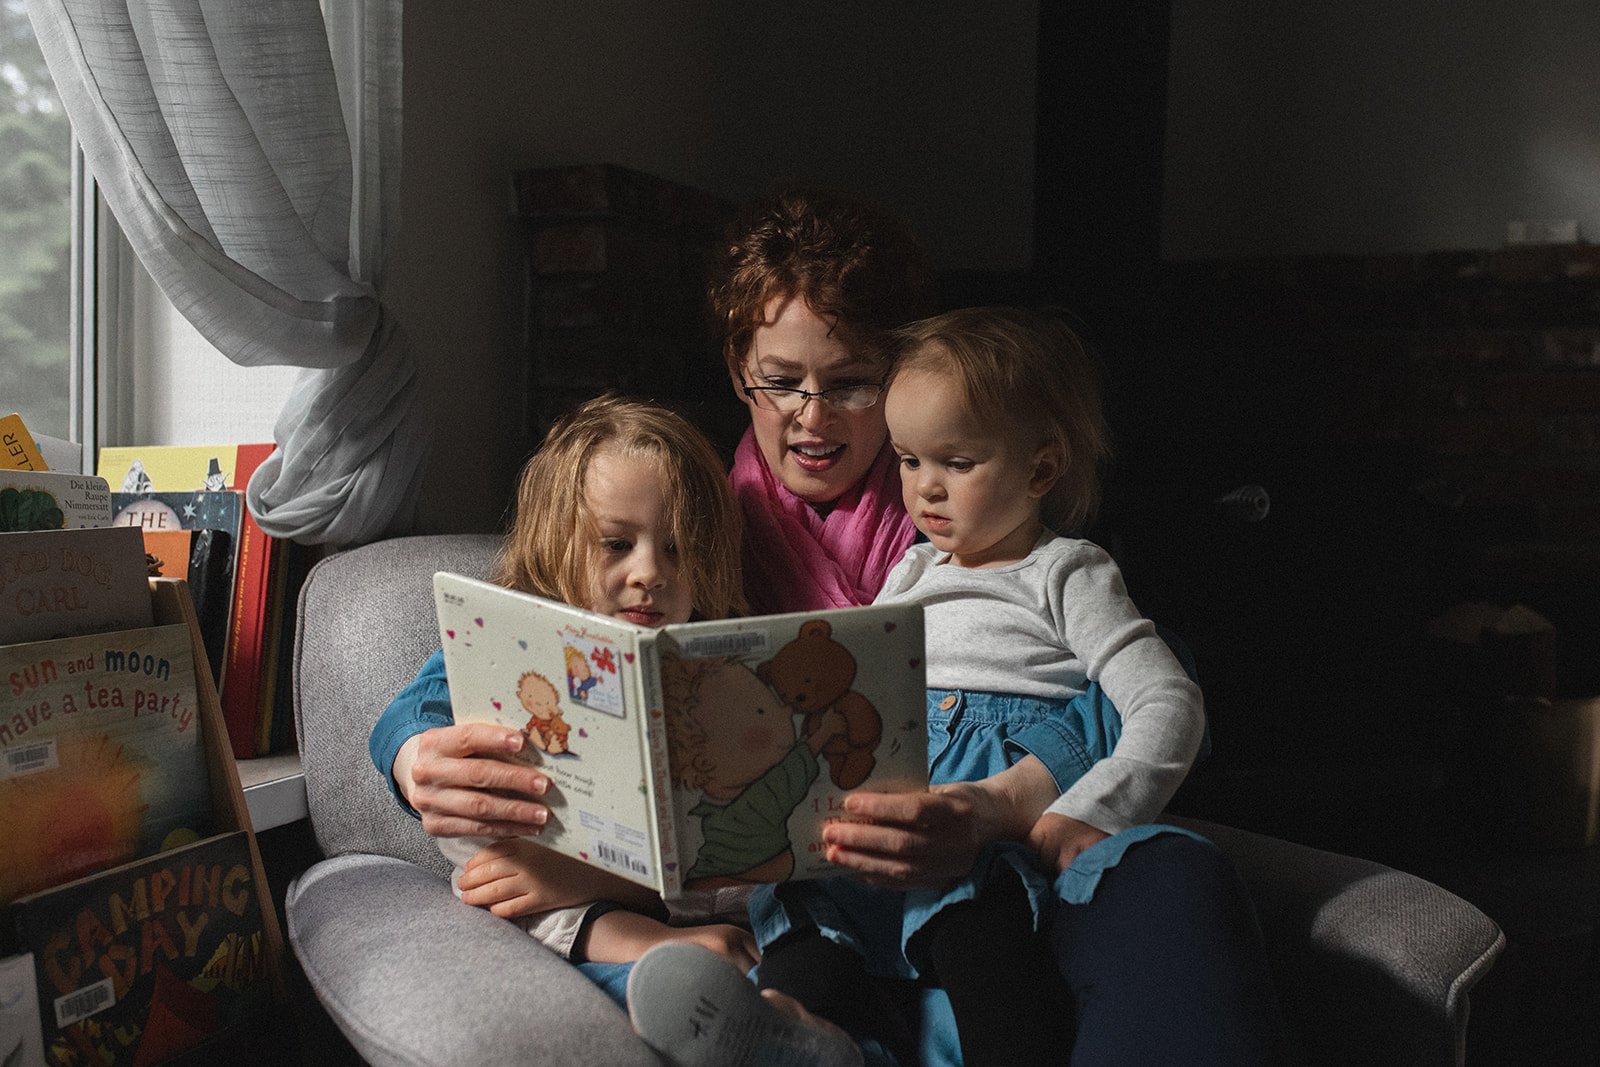 woman with glasses holds two children on her lap while she reads to them